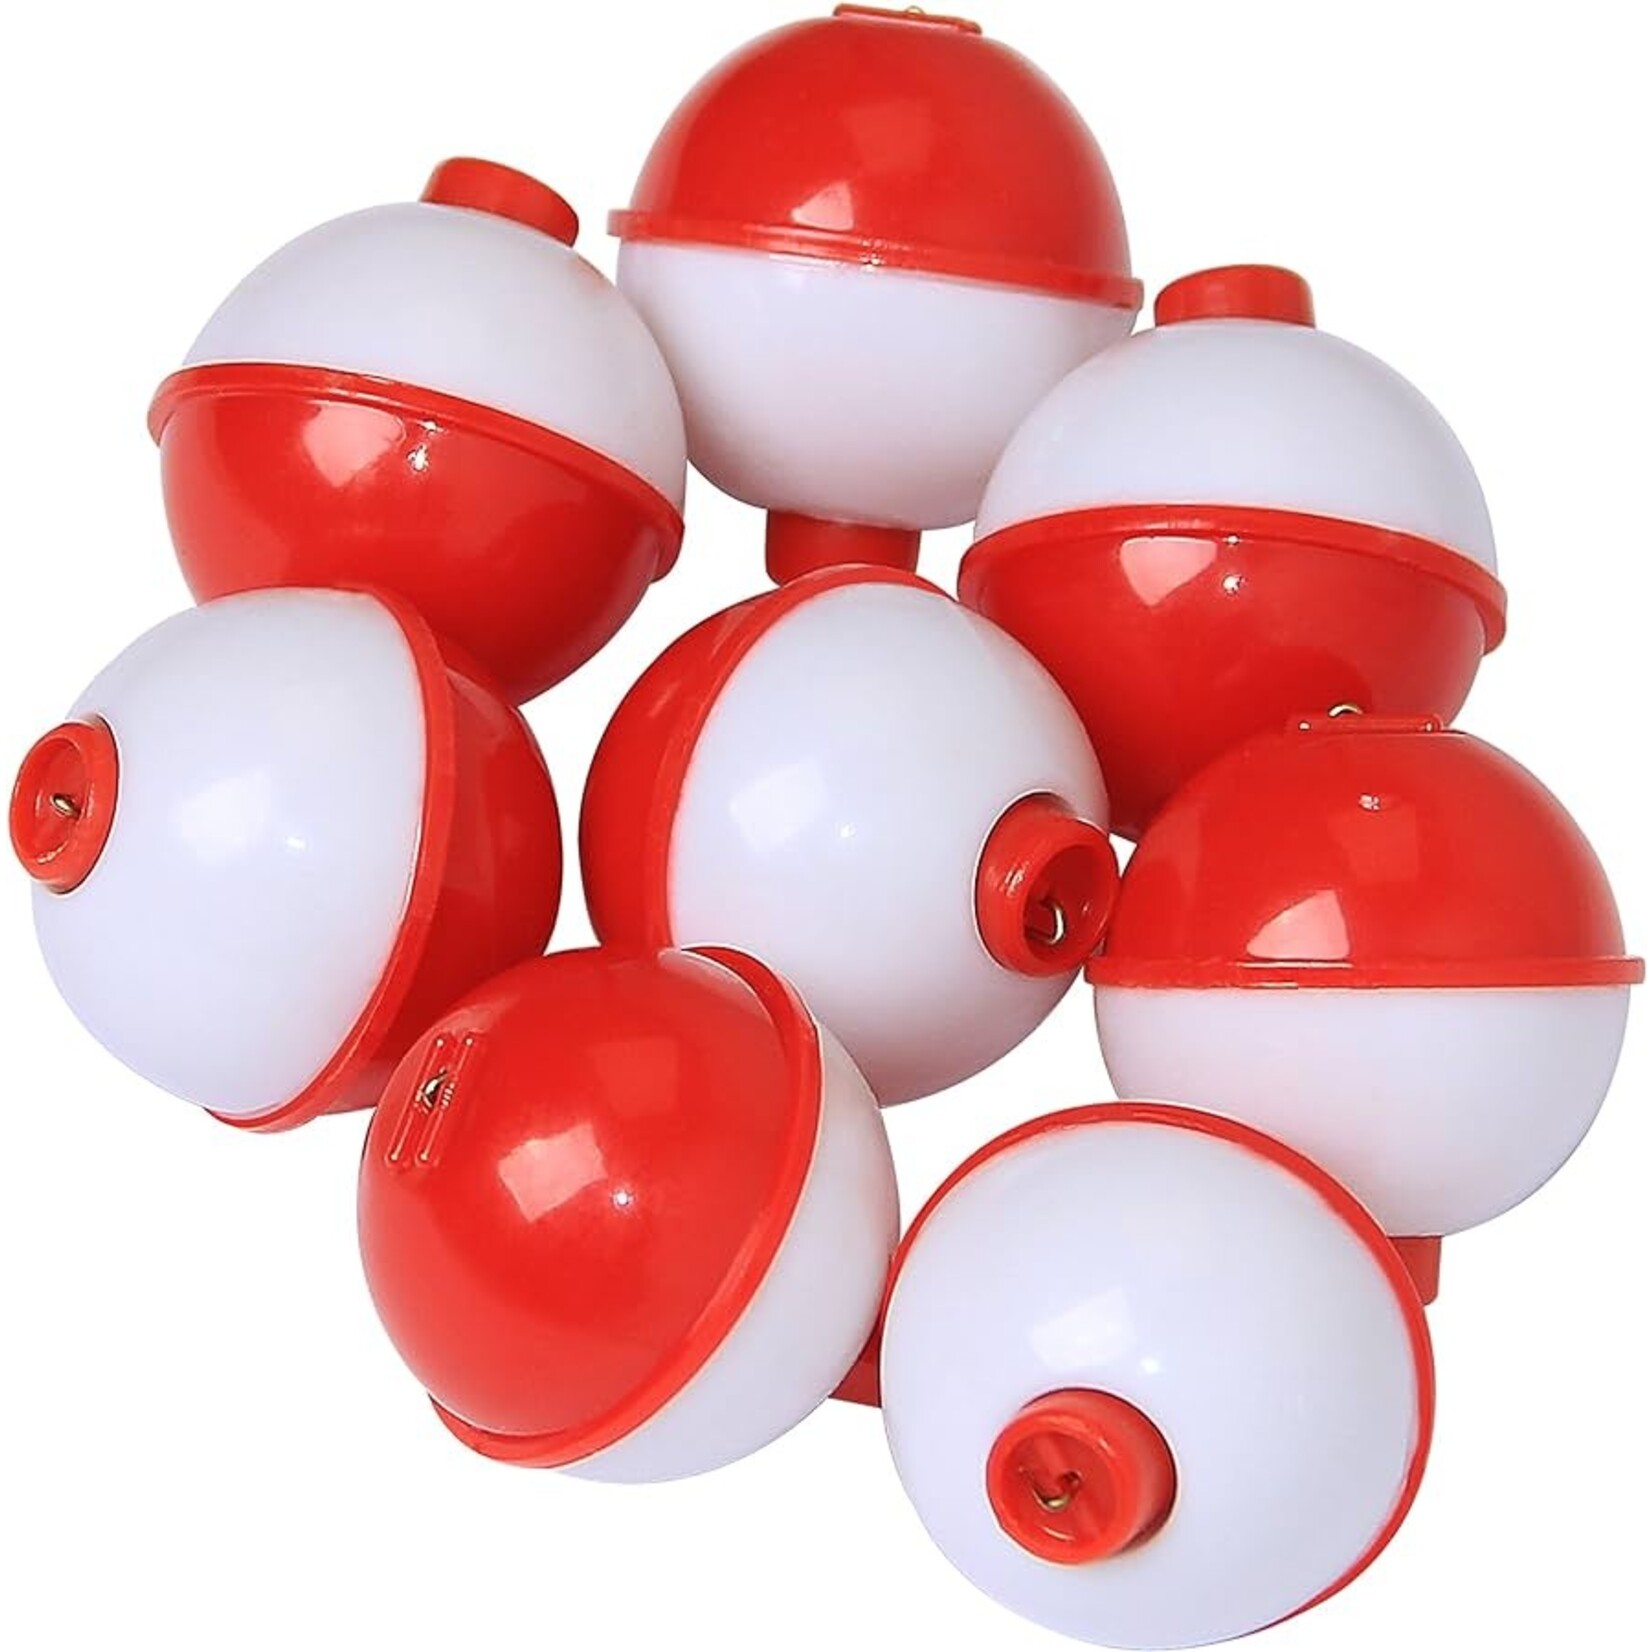 NXS NXS Gogosse, Gizmo, Float, Red and White